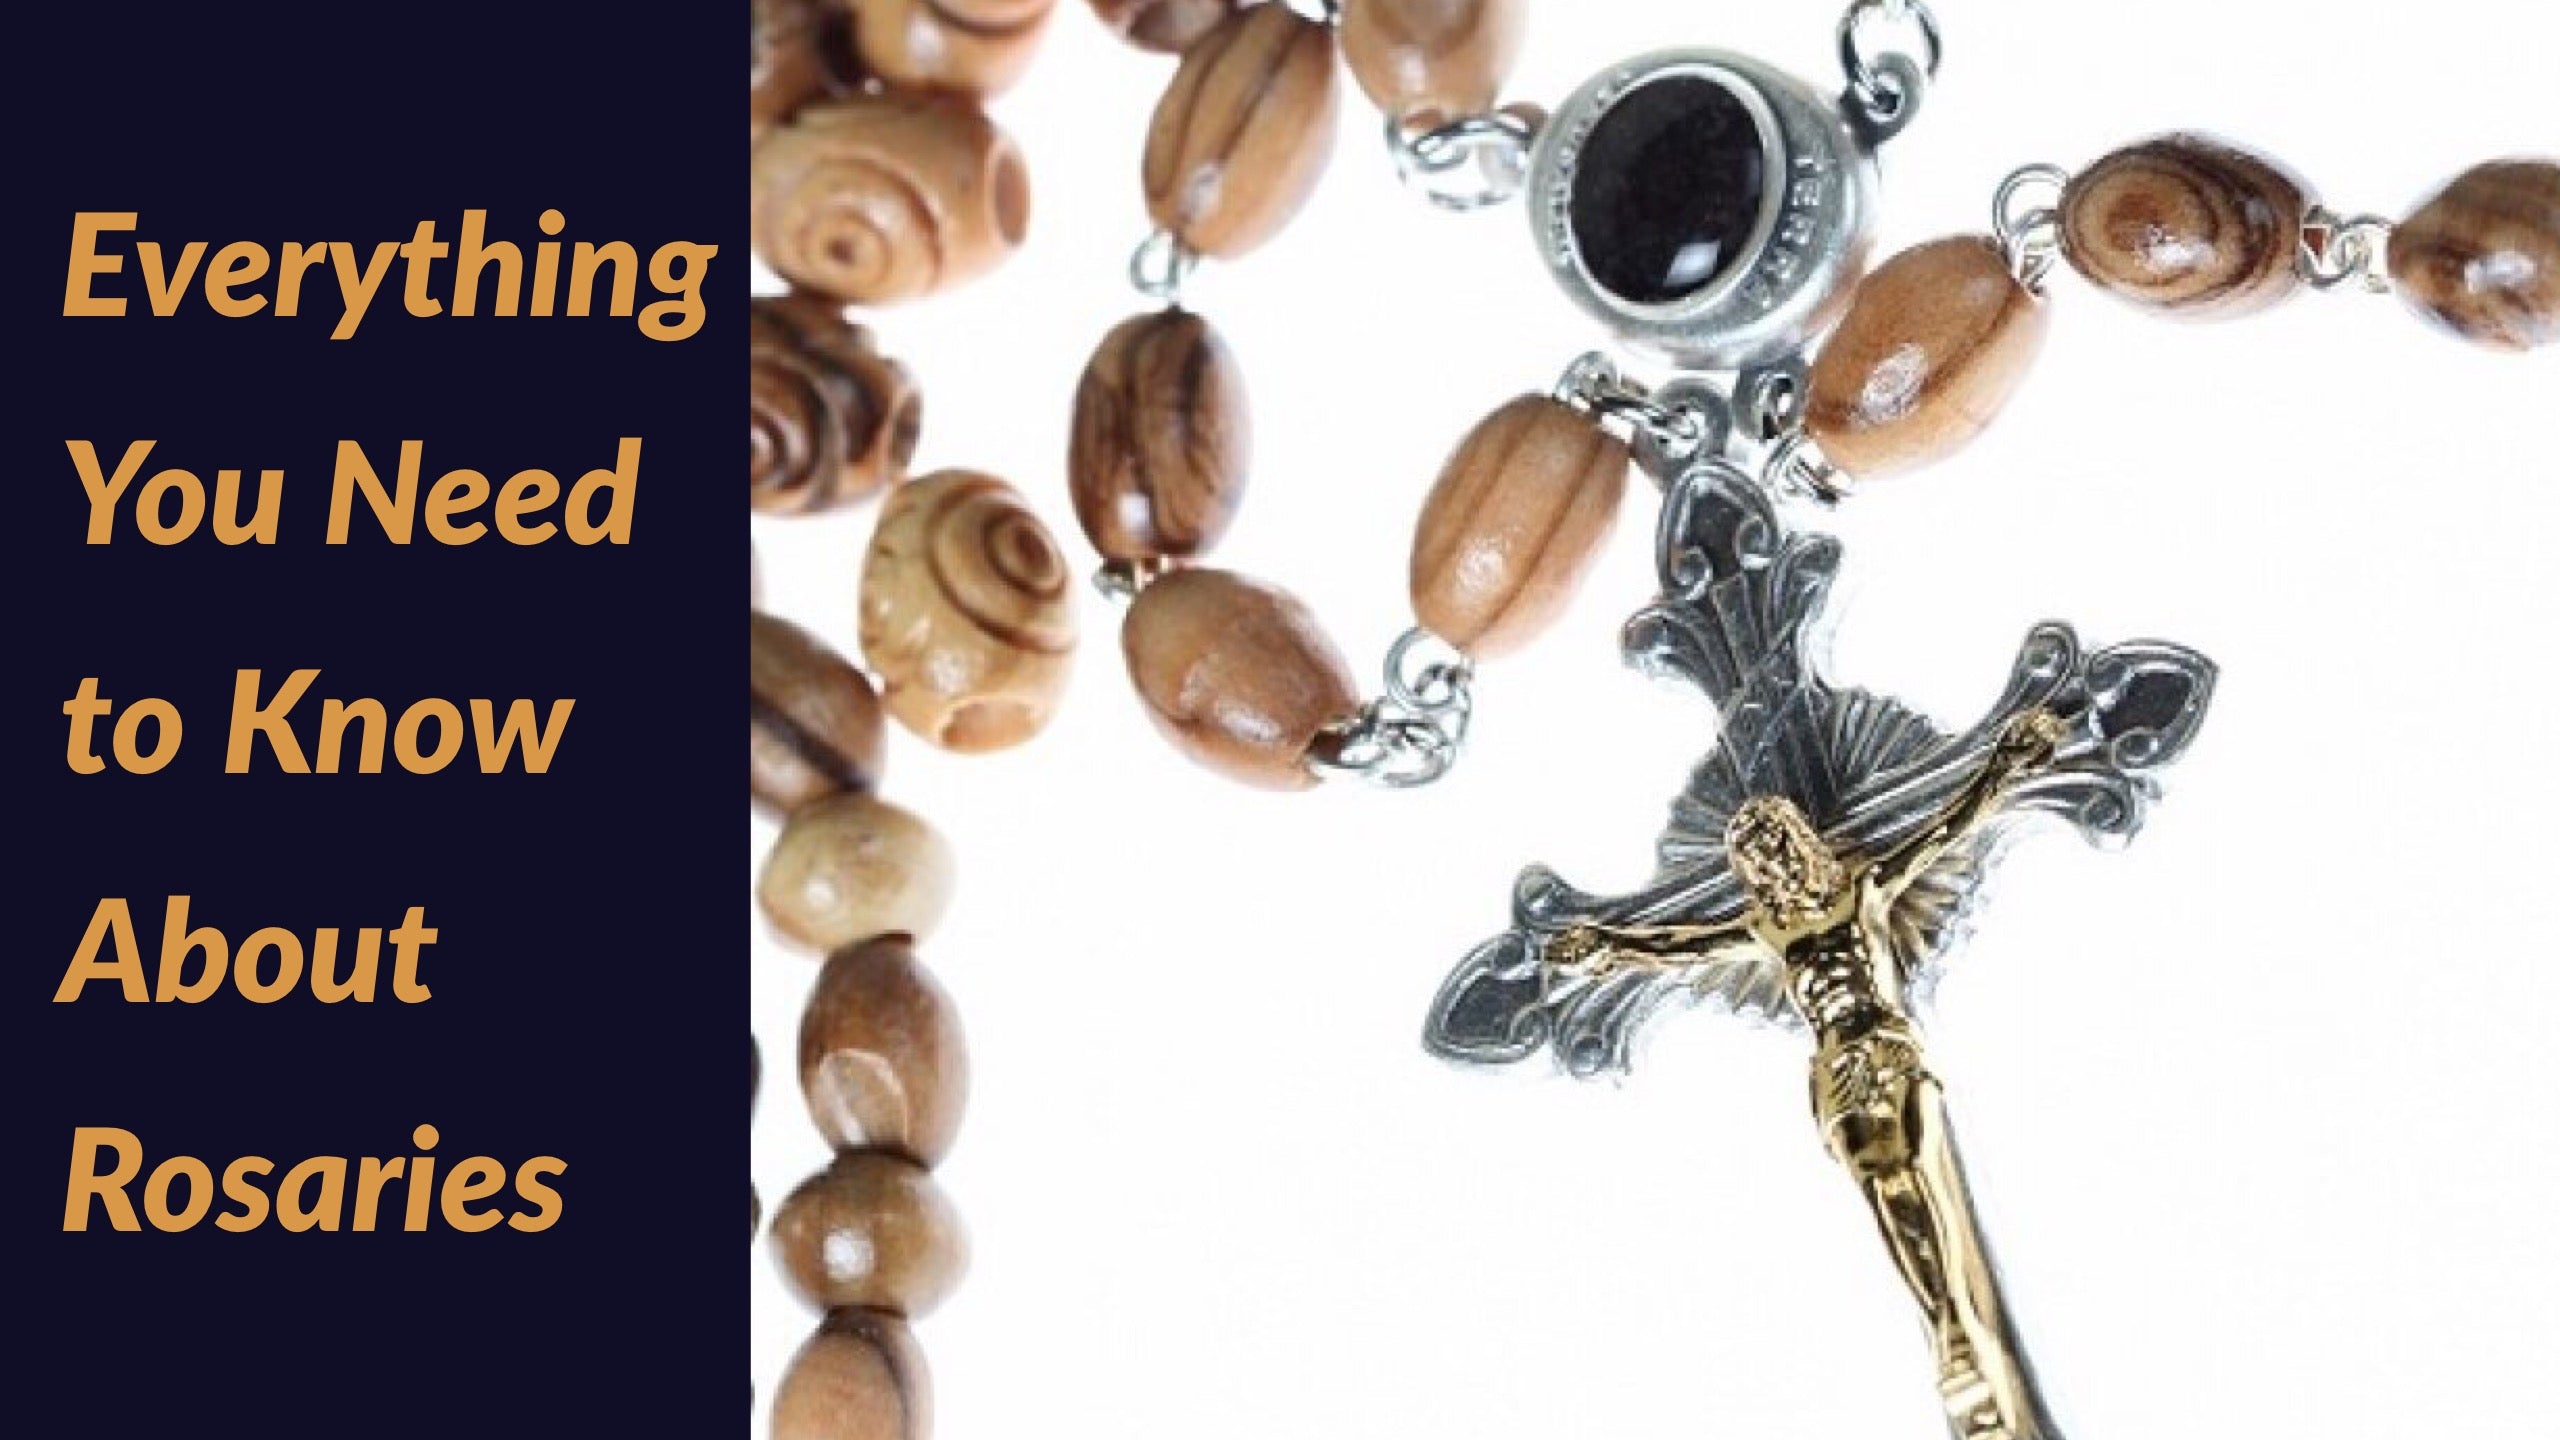 Everything You Need to Know About Rosaries